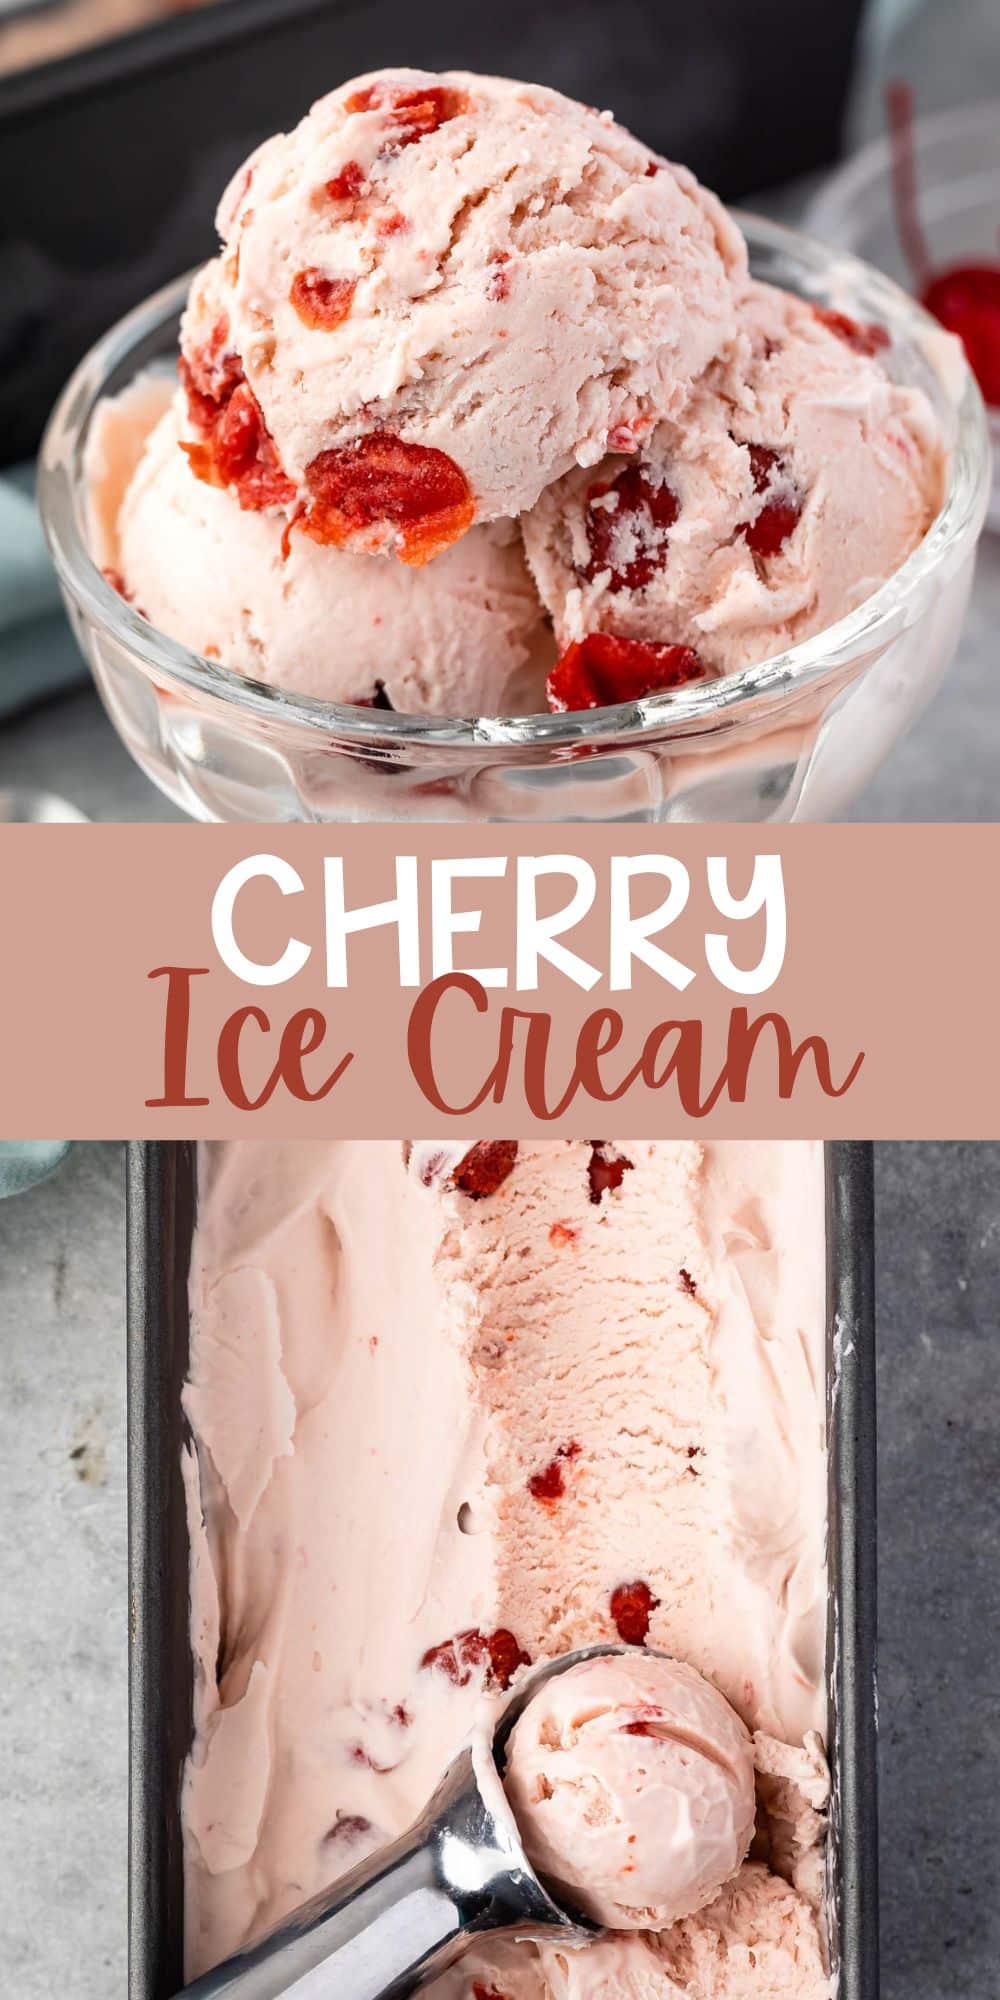 two photos of three scoops of cherry ice cream in a clear ice cream bowl with words of the image.